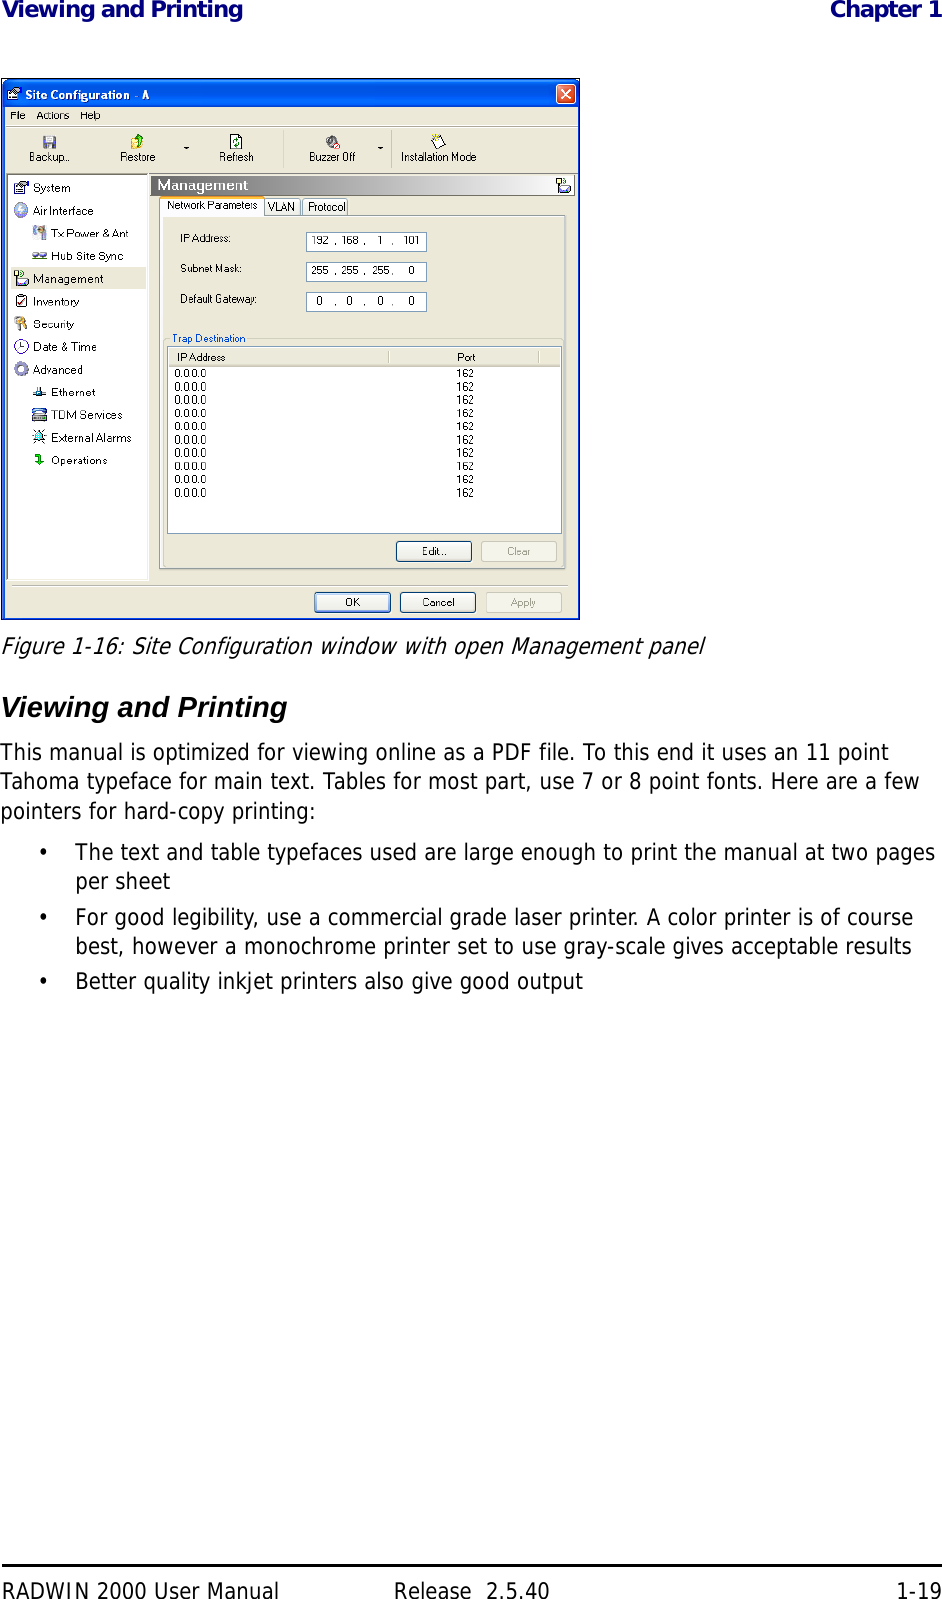 Viewing and Printing Chapter 1RADWIN 2000 User Manual Release  2.5.40 1-19Figure 1-16: Site Configuration window with open Management panelViewing and PrintingThis manual is optimized for viewing online as a PDF file. To this end it uses an 11 point Tahoma typeface for main text. Tables for most part, use 7 or 8 point fonts. Here are a few pointers for hard-copy printing:• The text and table typefaces used are large enough to print the manual at two pages per sheet• For good legibility, use a commercial grade laser printer. A color printer is of course best, however a monochrome printer set to use gray-scale gives acceptable results• Better quality inkjet printers also give good output 